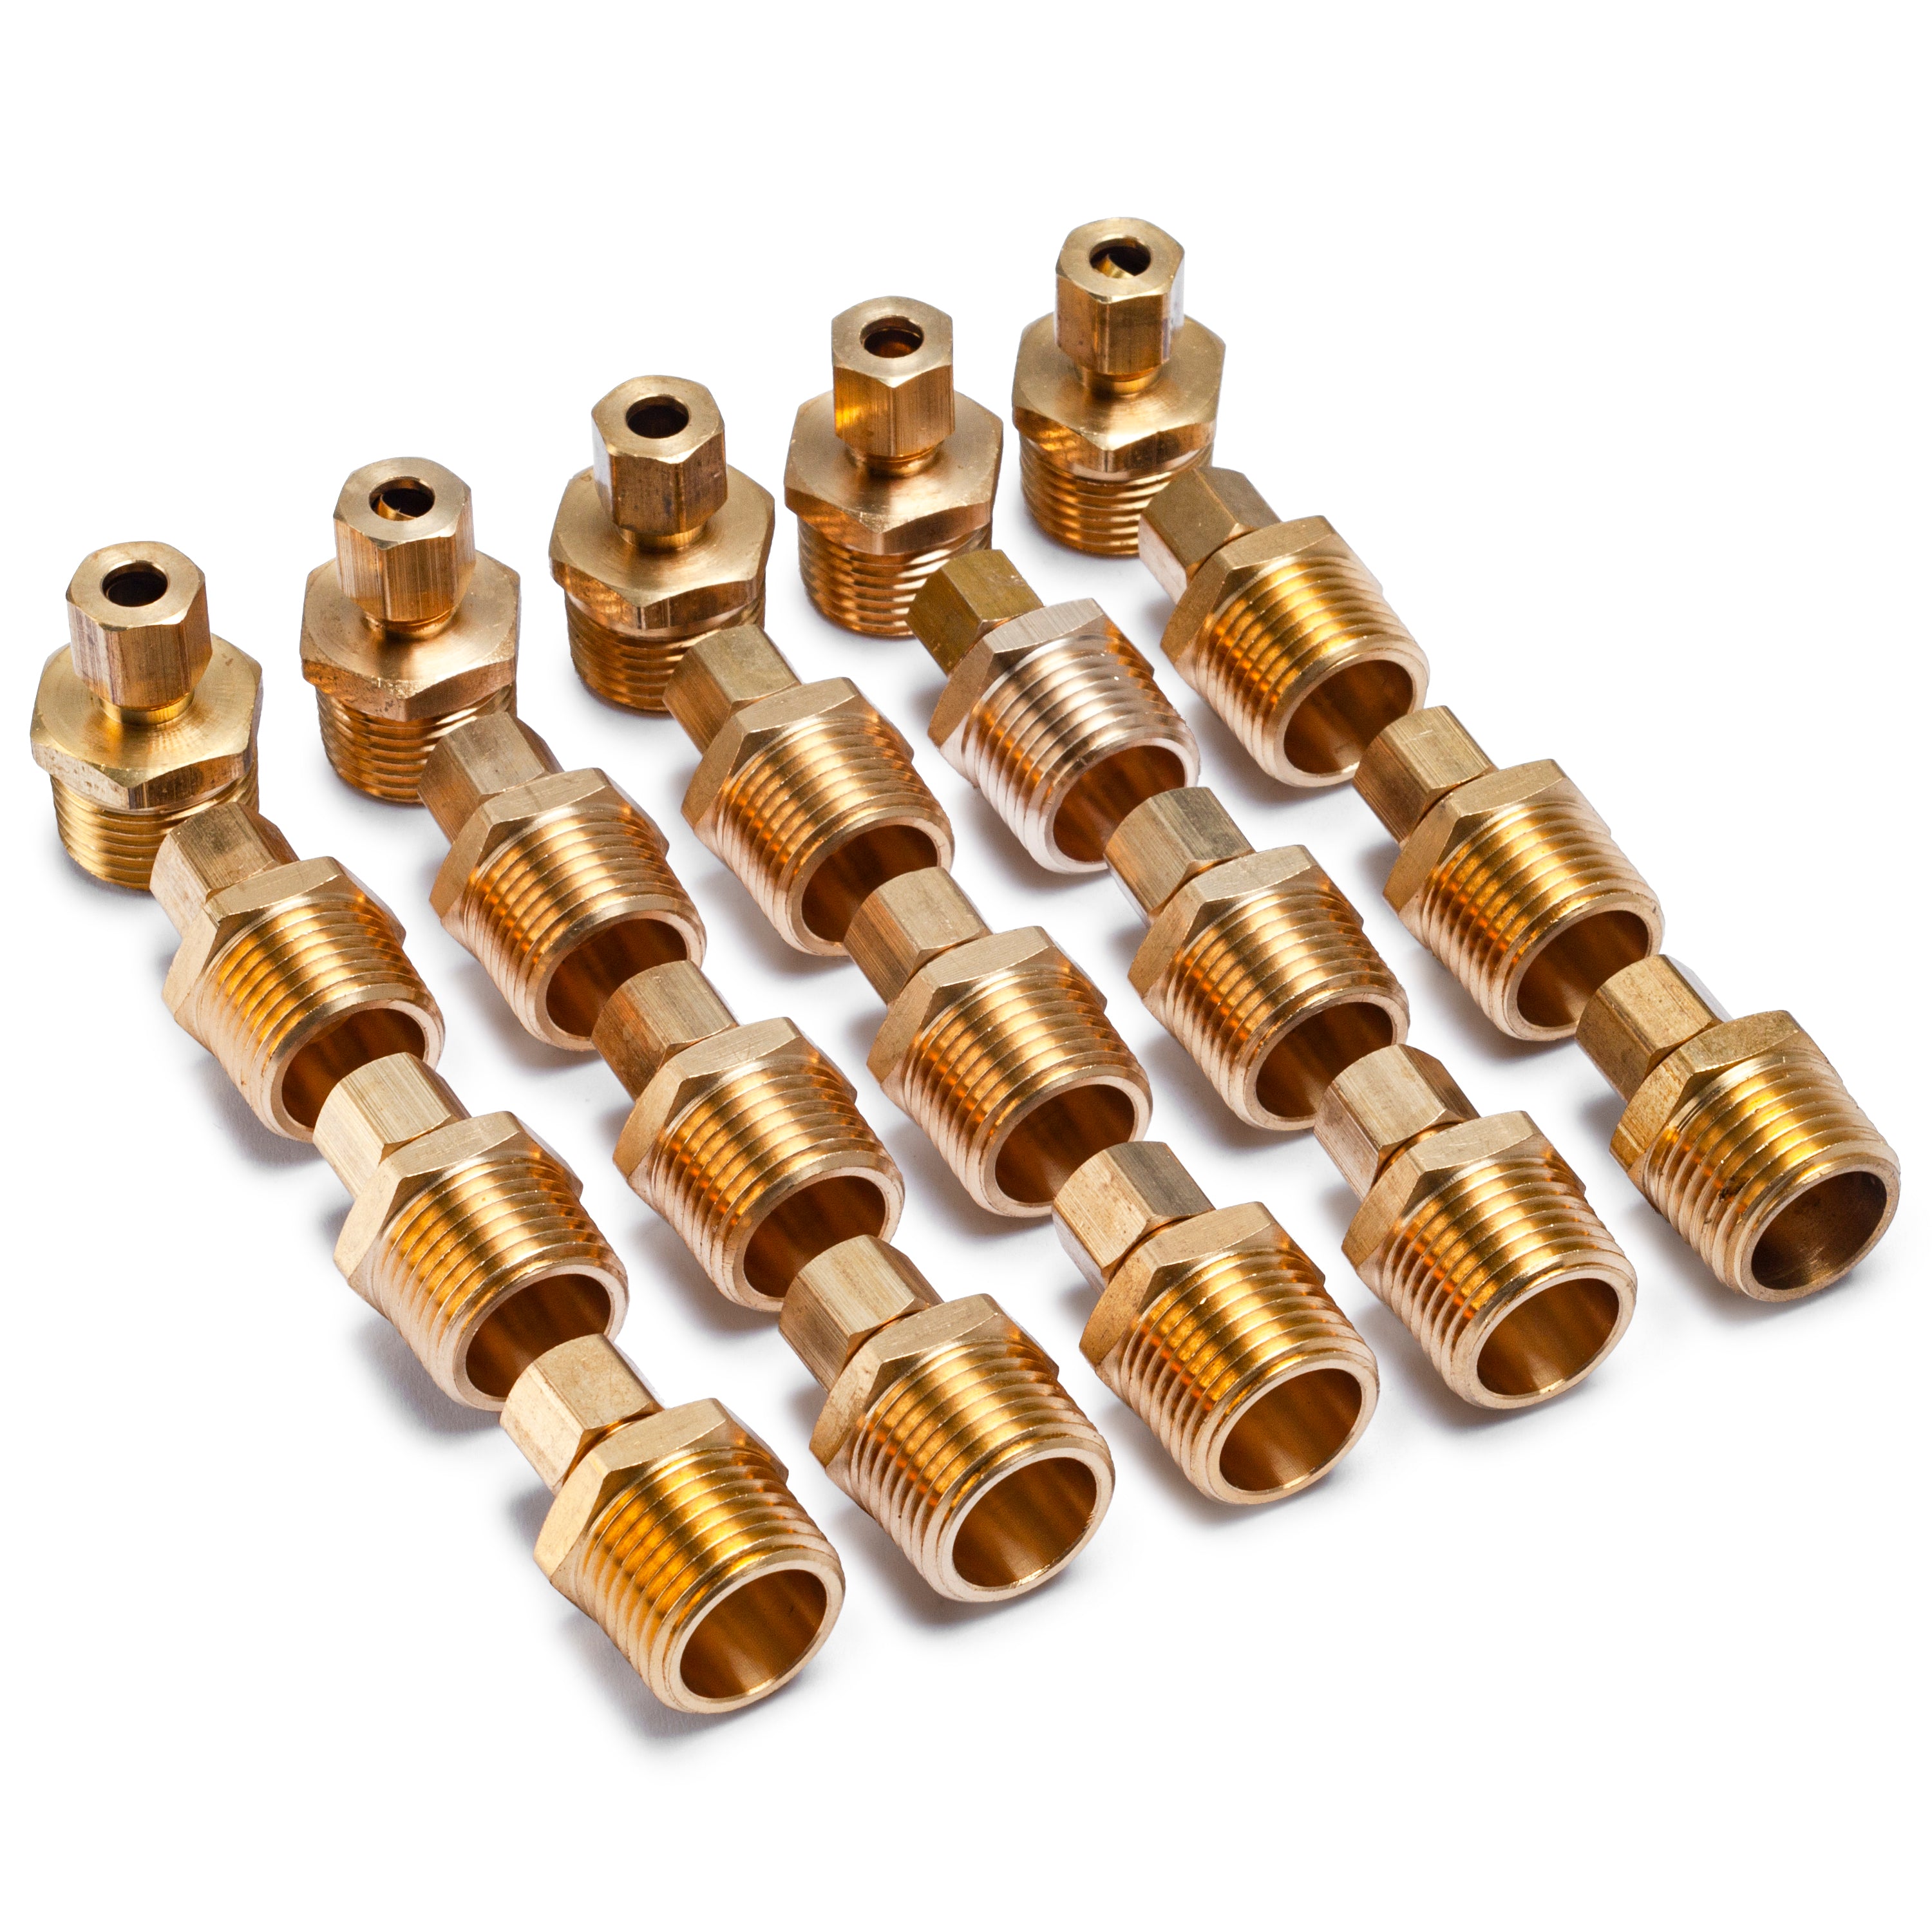 LTWFITTING Brass 1/4-Inch OD x 1/2-Inch Male NPT Compression Connector Fitting(Pack of 20)